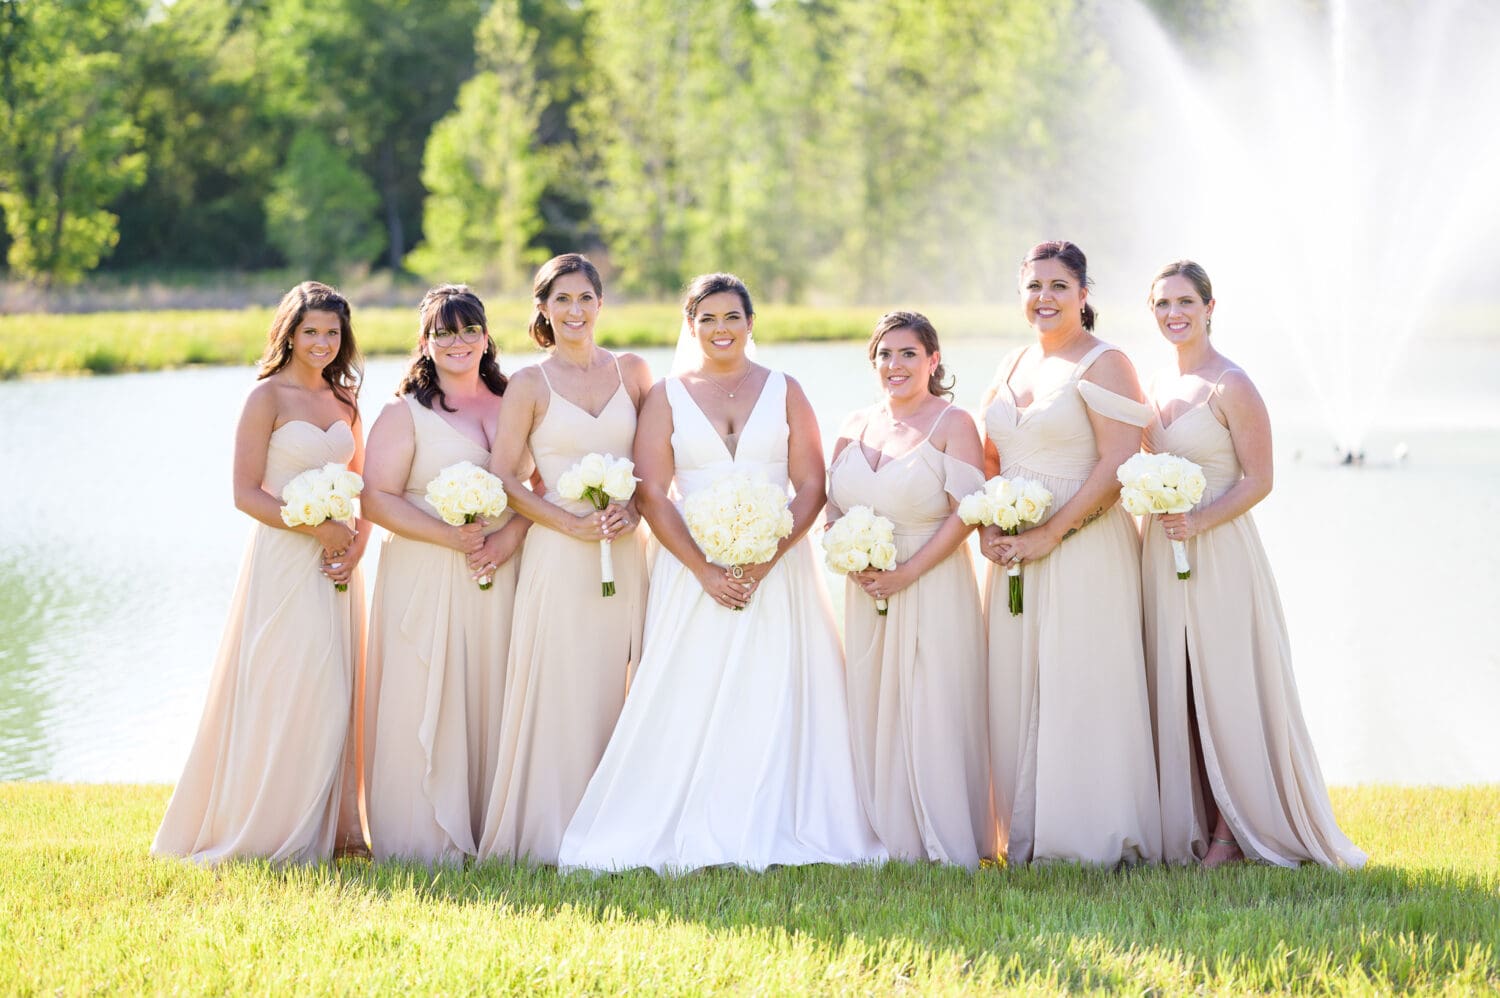 Pictures with the bridesmaids - The Venue at White Oaks Farm